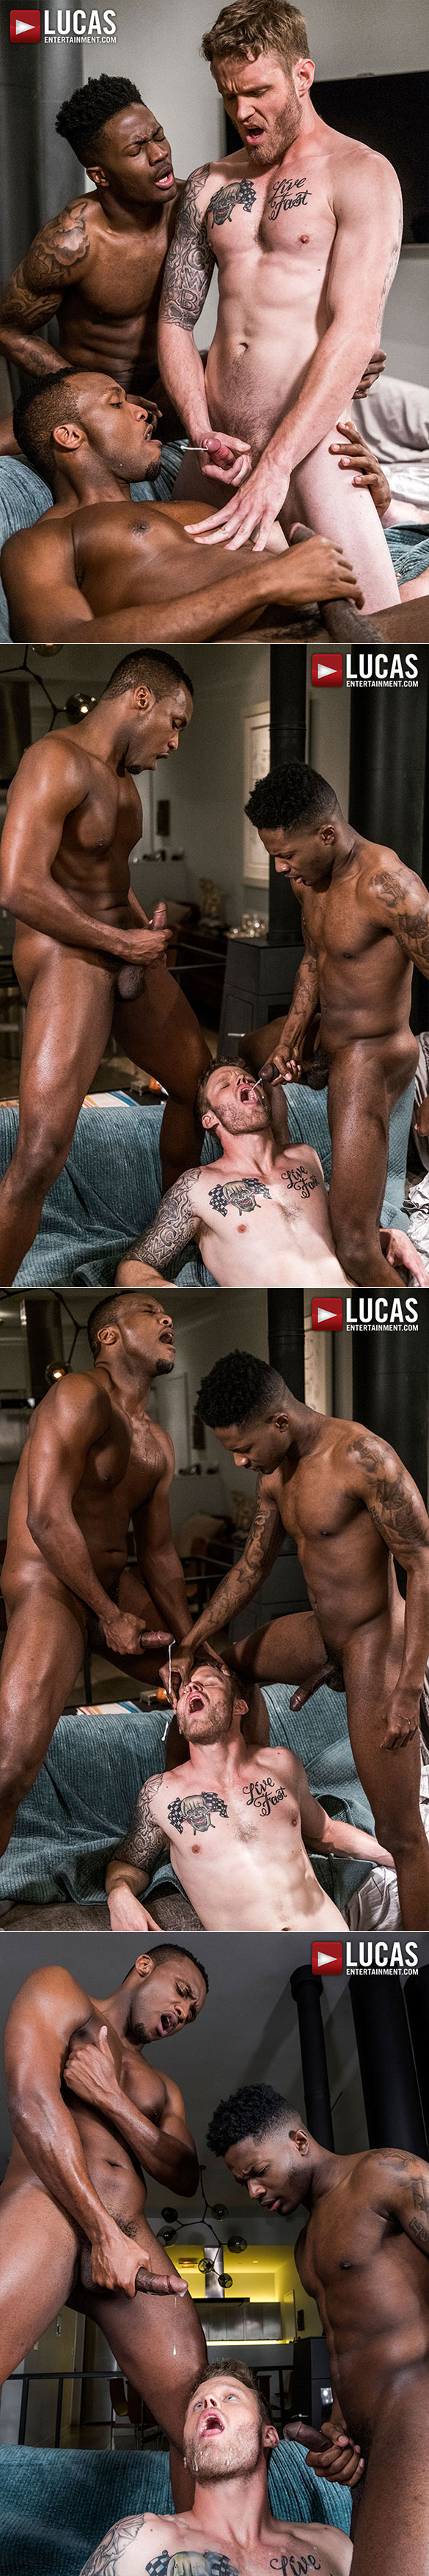 Lucas Entertainment: Shawn Reeve takes Andre Donovan and Bama Romello's big dicks raw